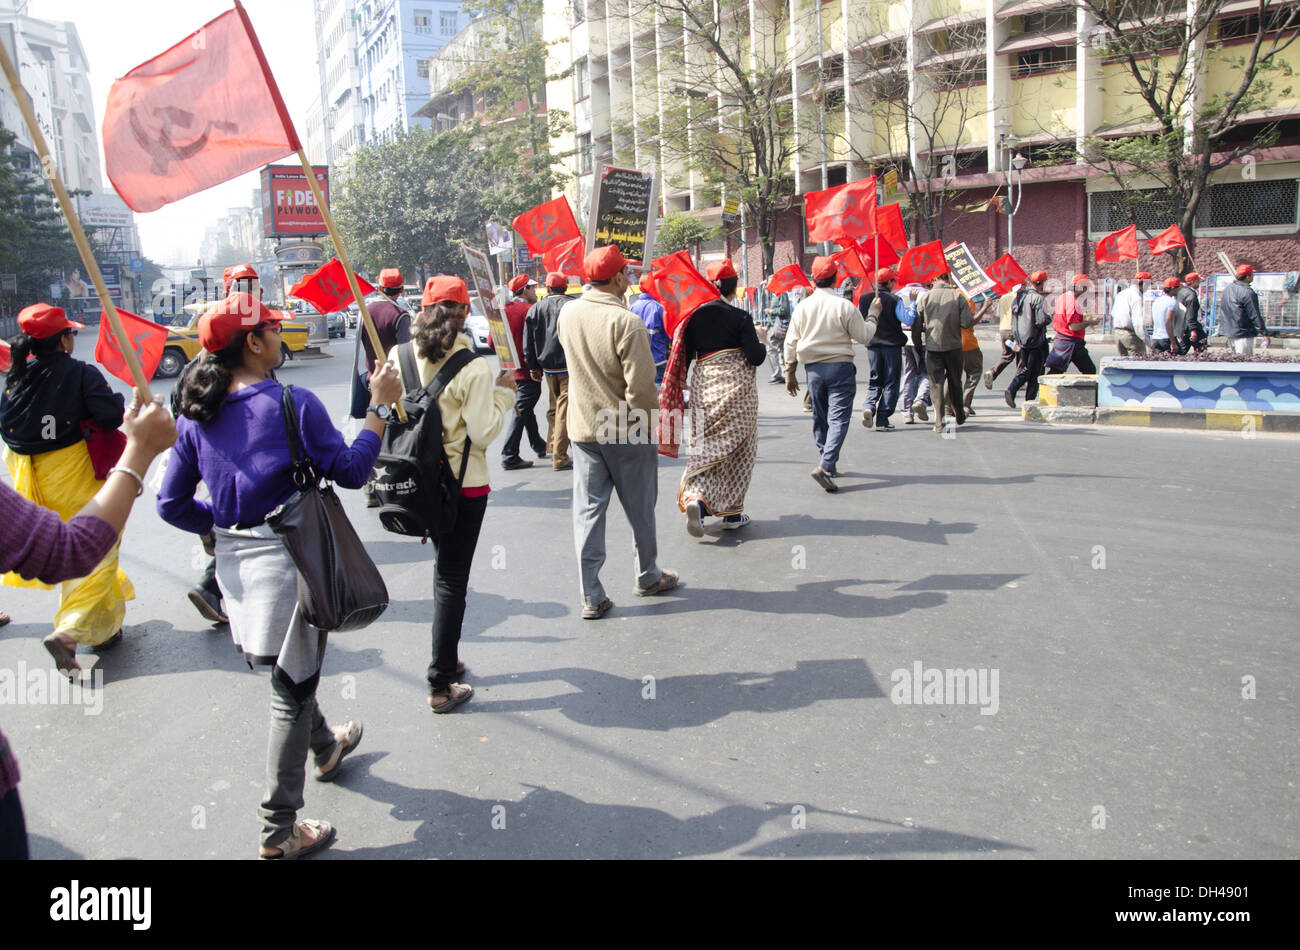 Red flag demonstration procession rally of left political parties on road at Calcutta Kolkata West Bengal India Asia Stock Photo